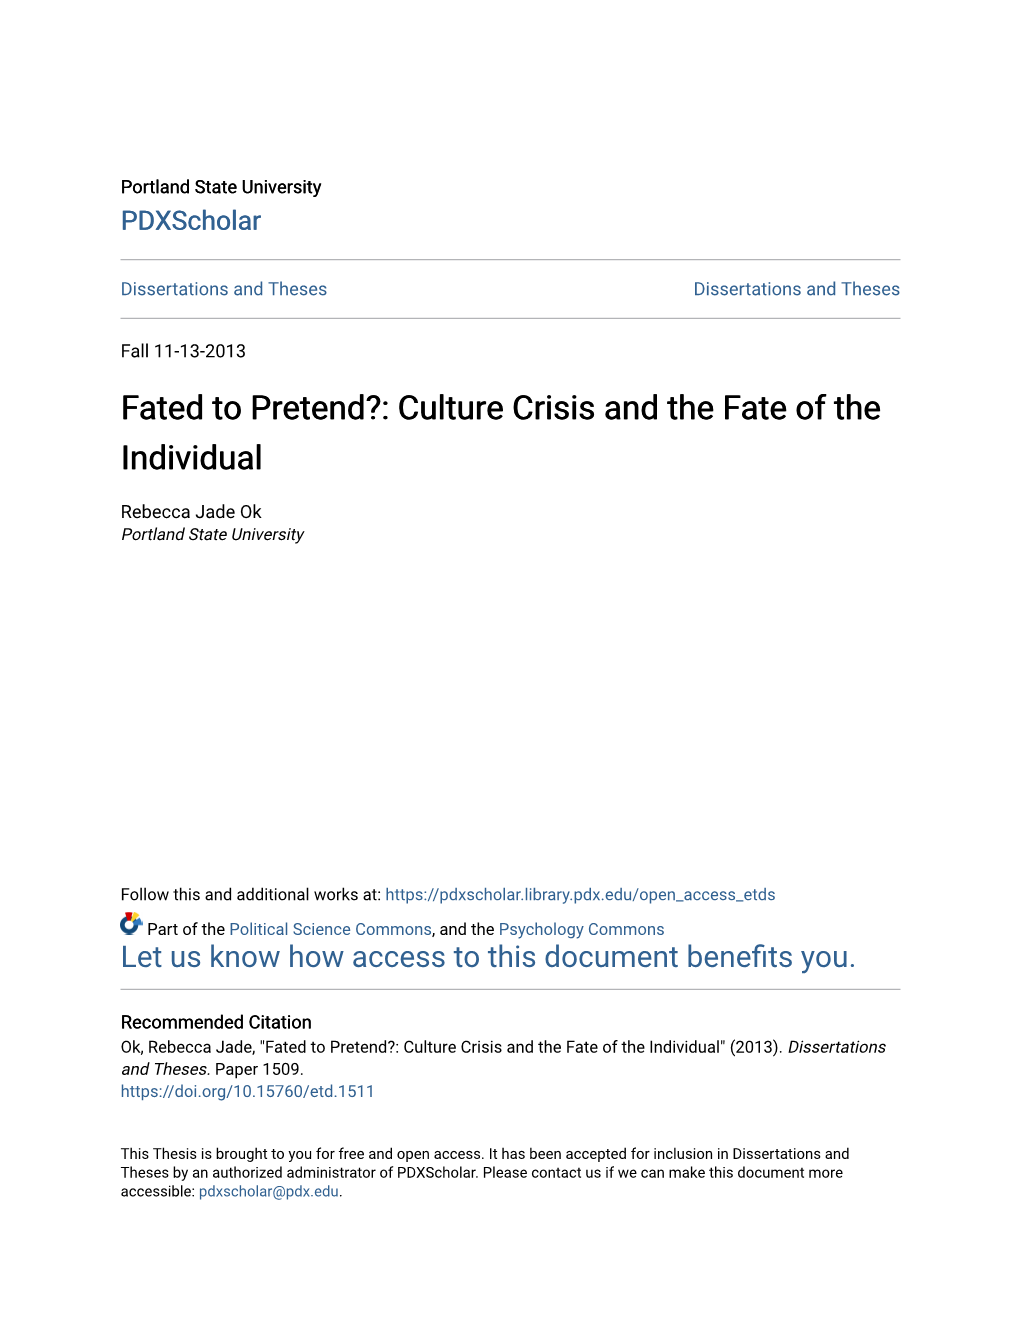 Fated to Pretend?: Culture Crisis and the Fate of the Individual